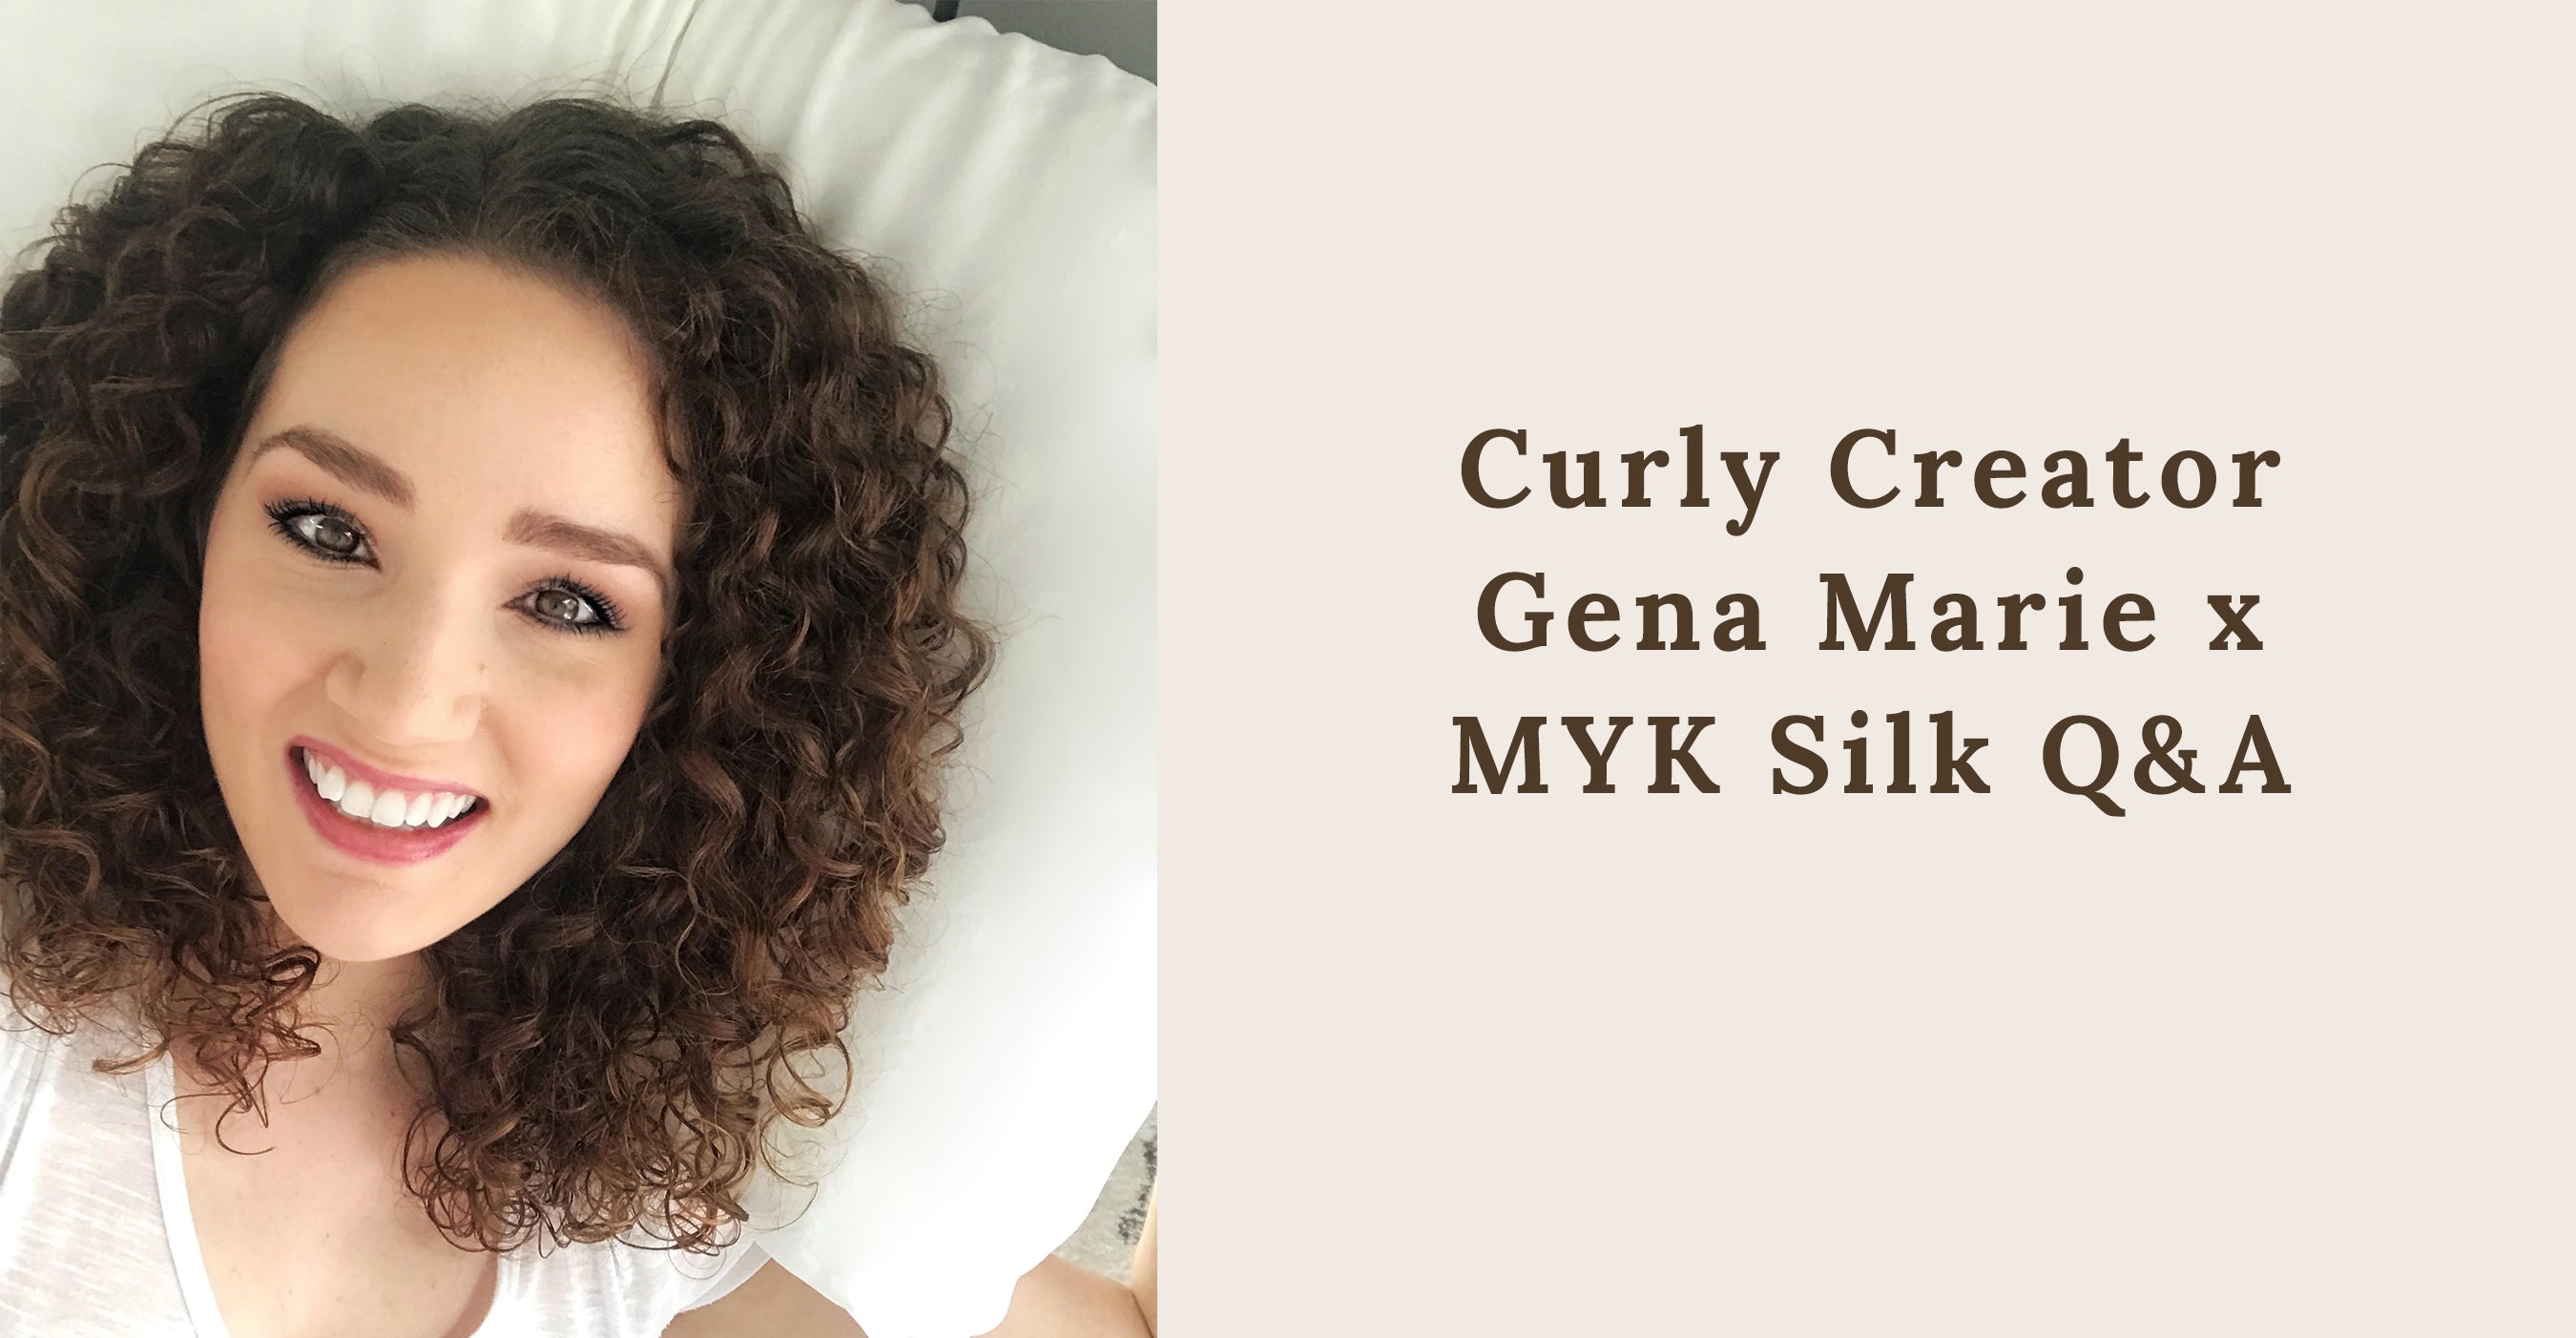 Benefits of a Satin Pillowcase For Curly Hair – Curlsmith USA